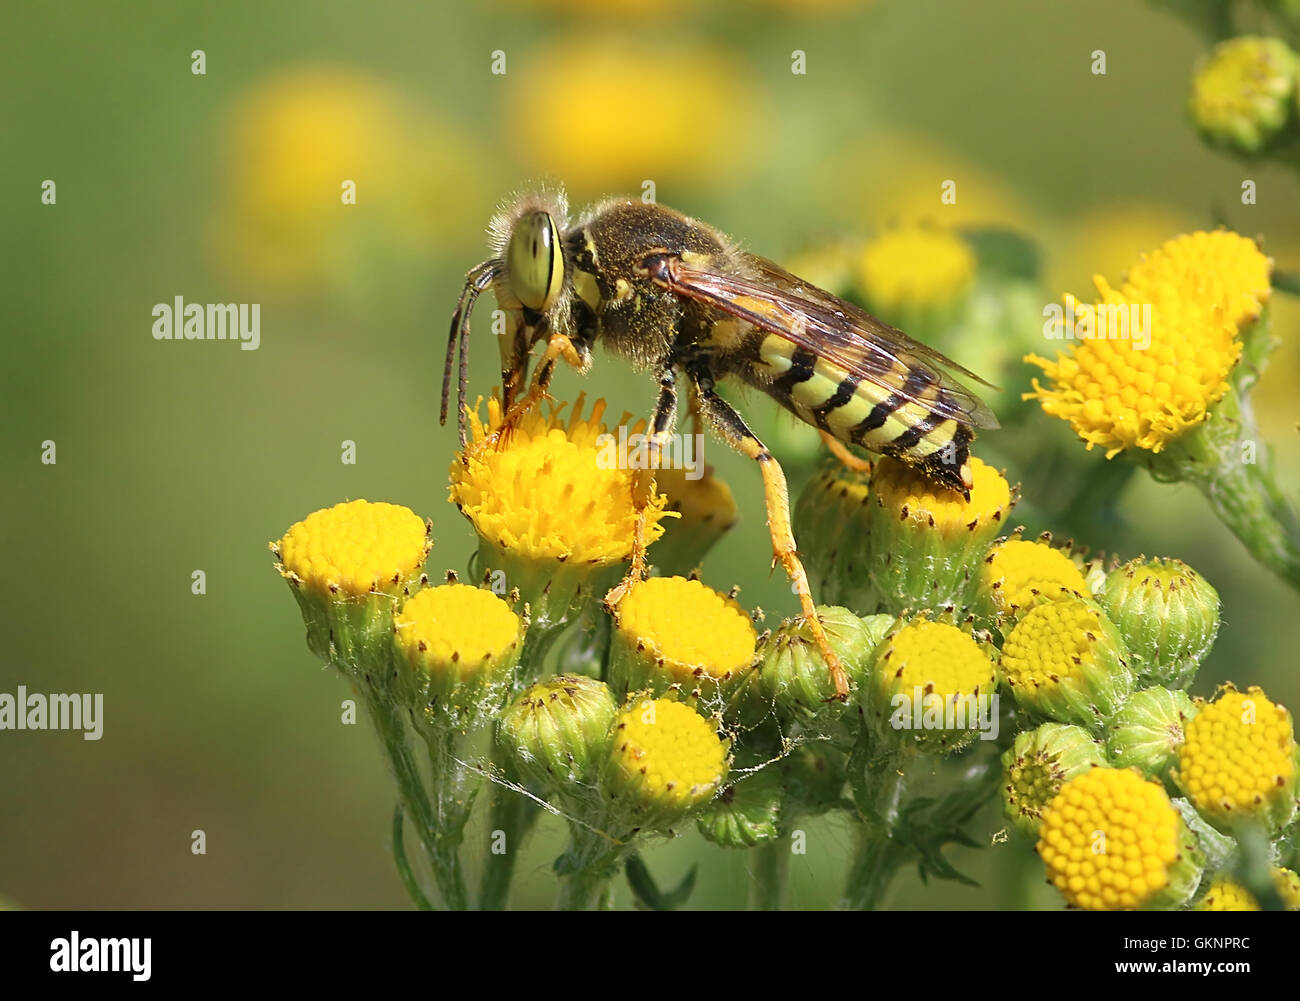 European Bembix rostrata green-eyed Sand wasp. Foraging on a yellow flower Stock Photo